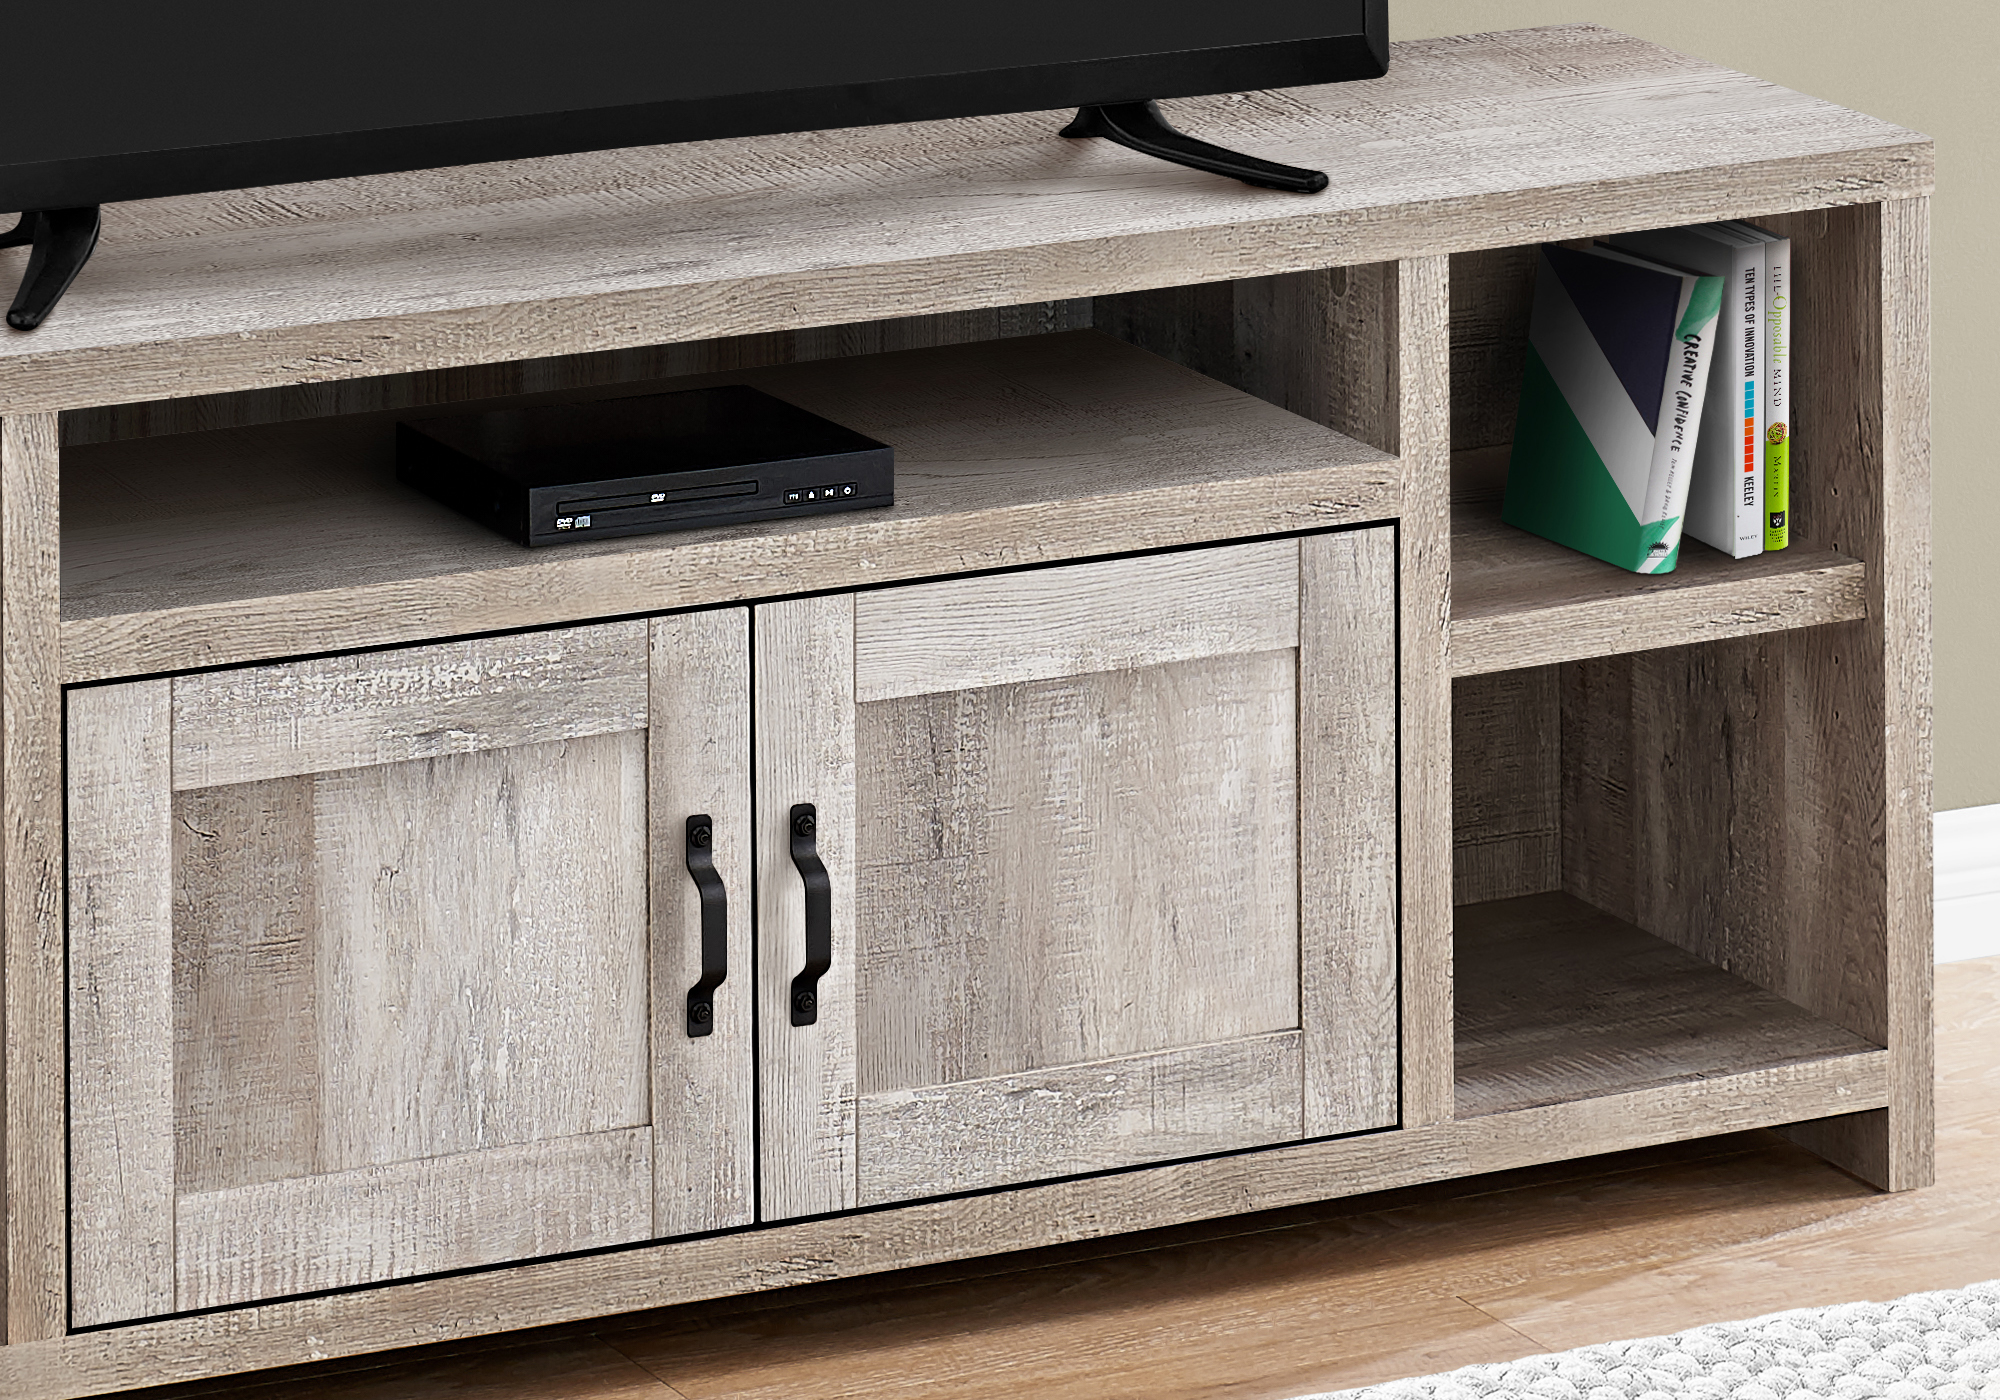 TV STAND - 60"L / TAUPE RECLAIMED WOOD-LOOK "